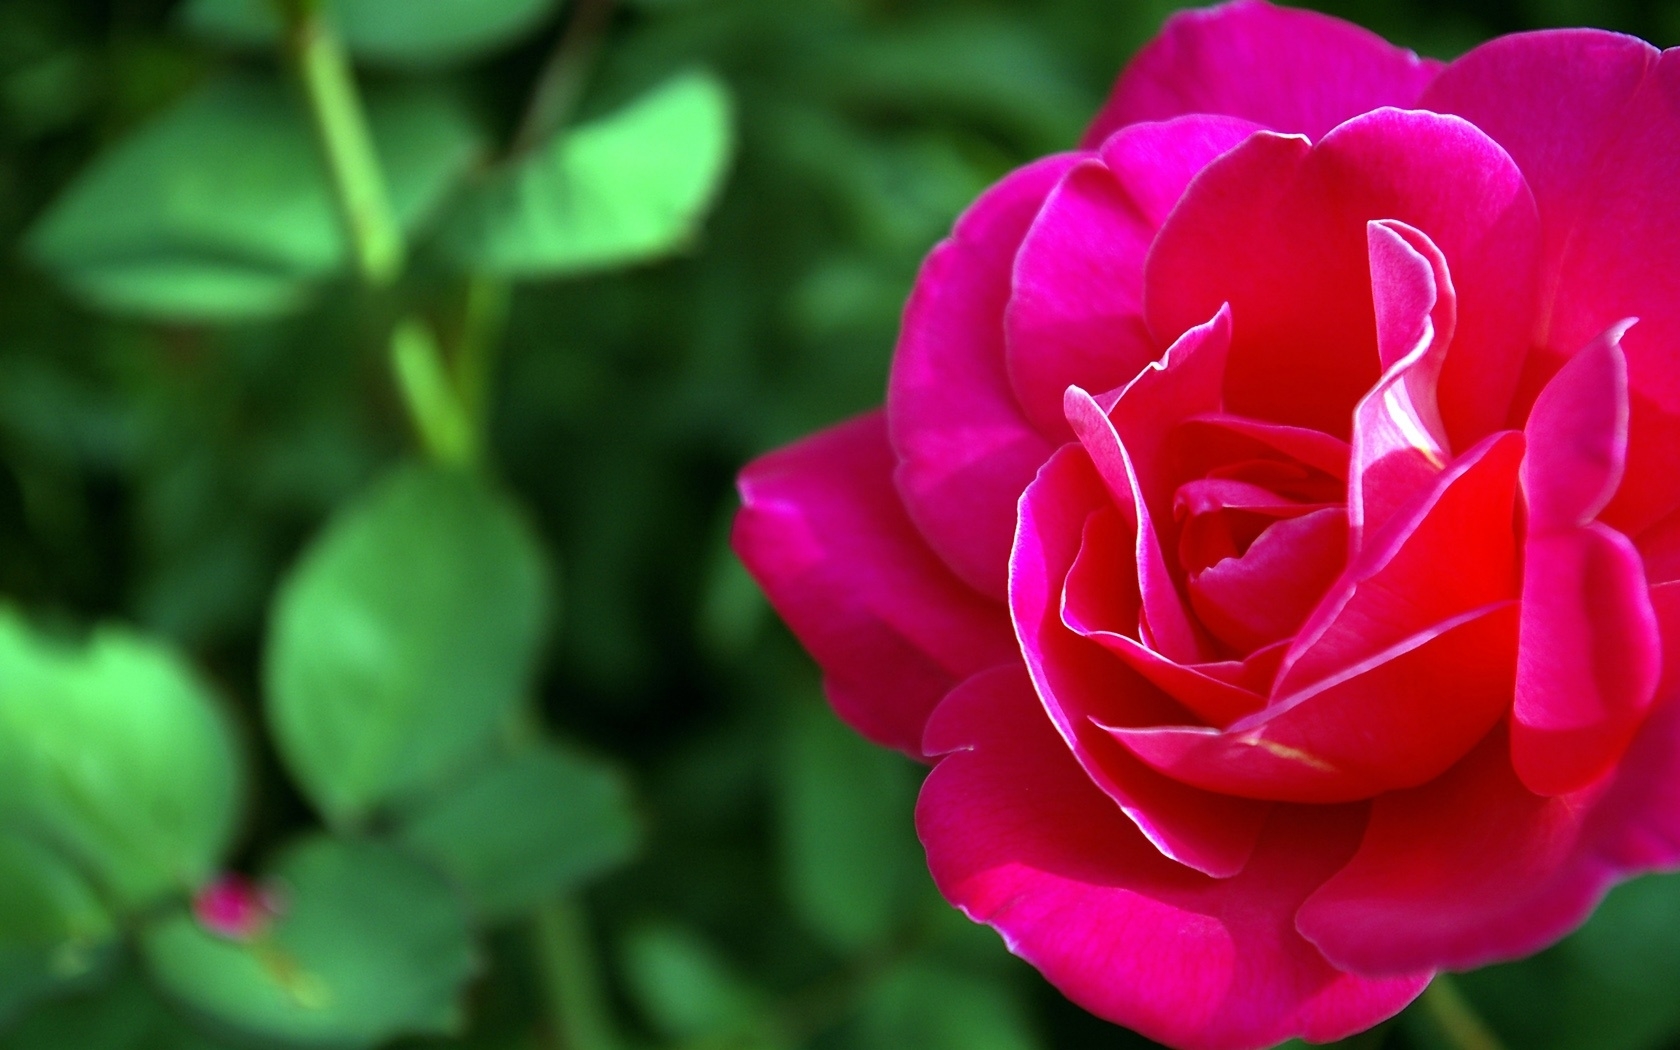 plants, flowers, roses, red FHD, 4K, UHD